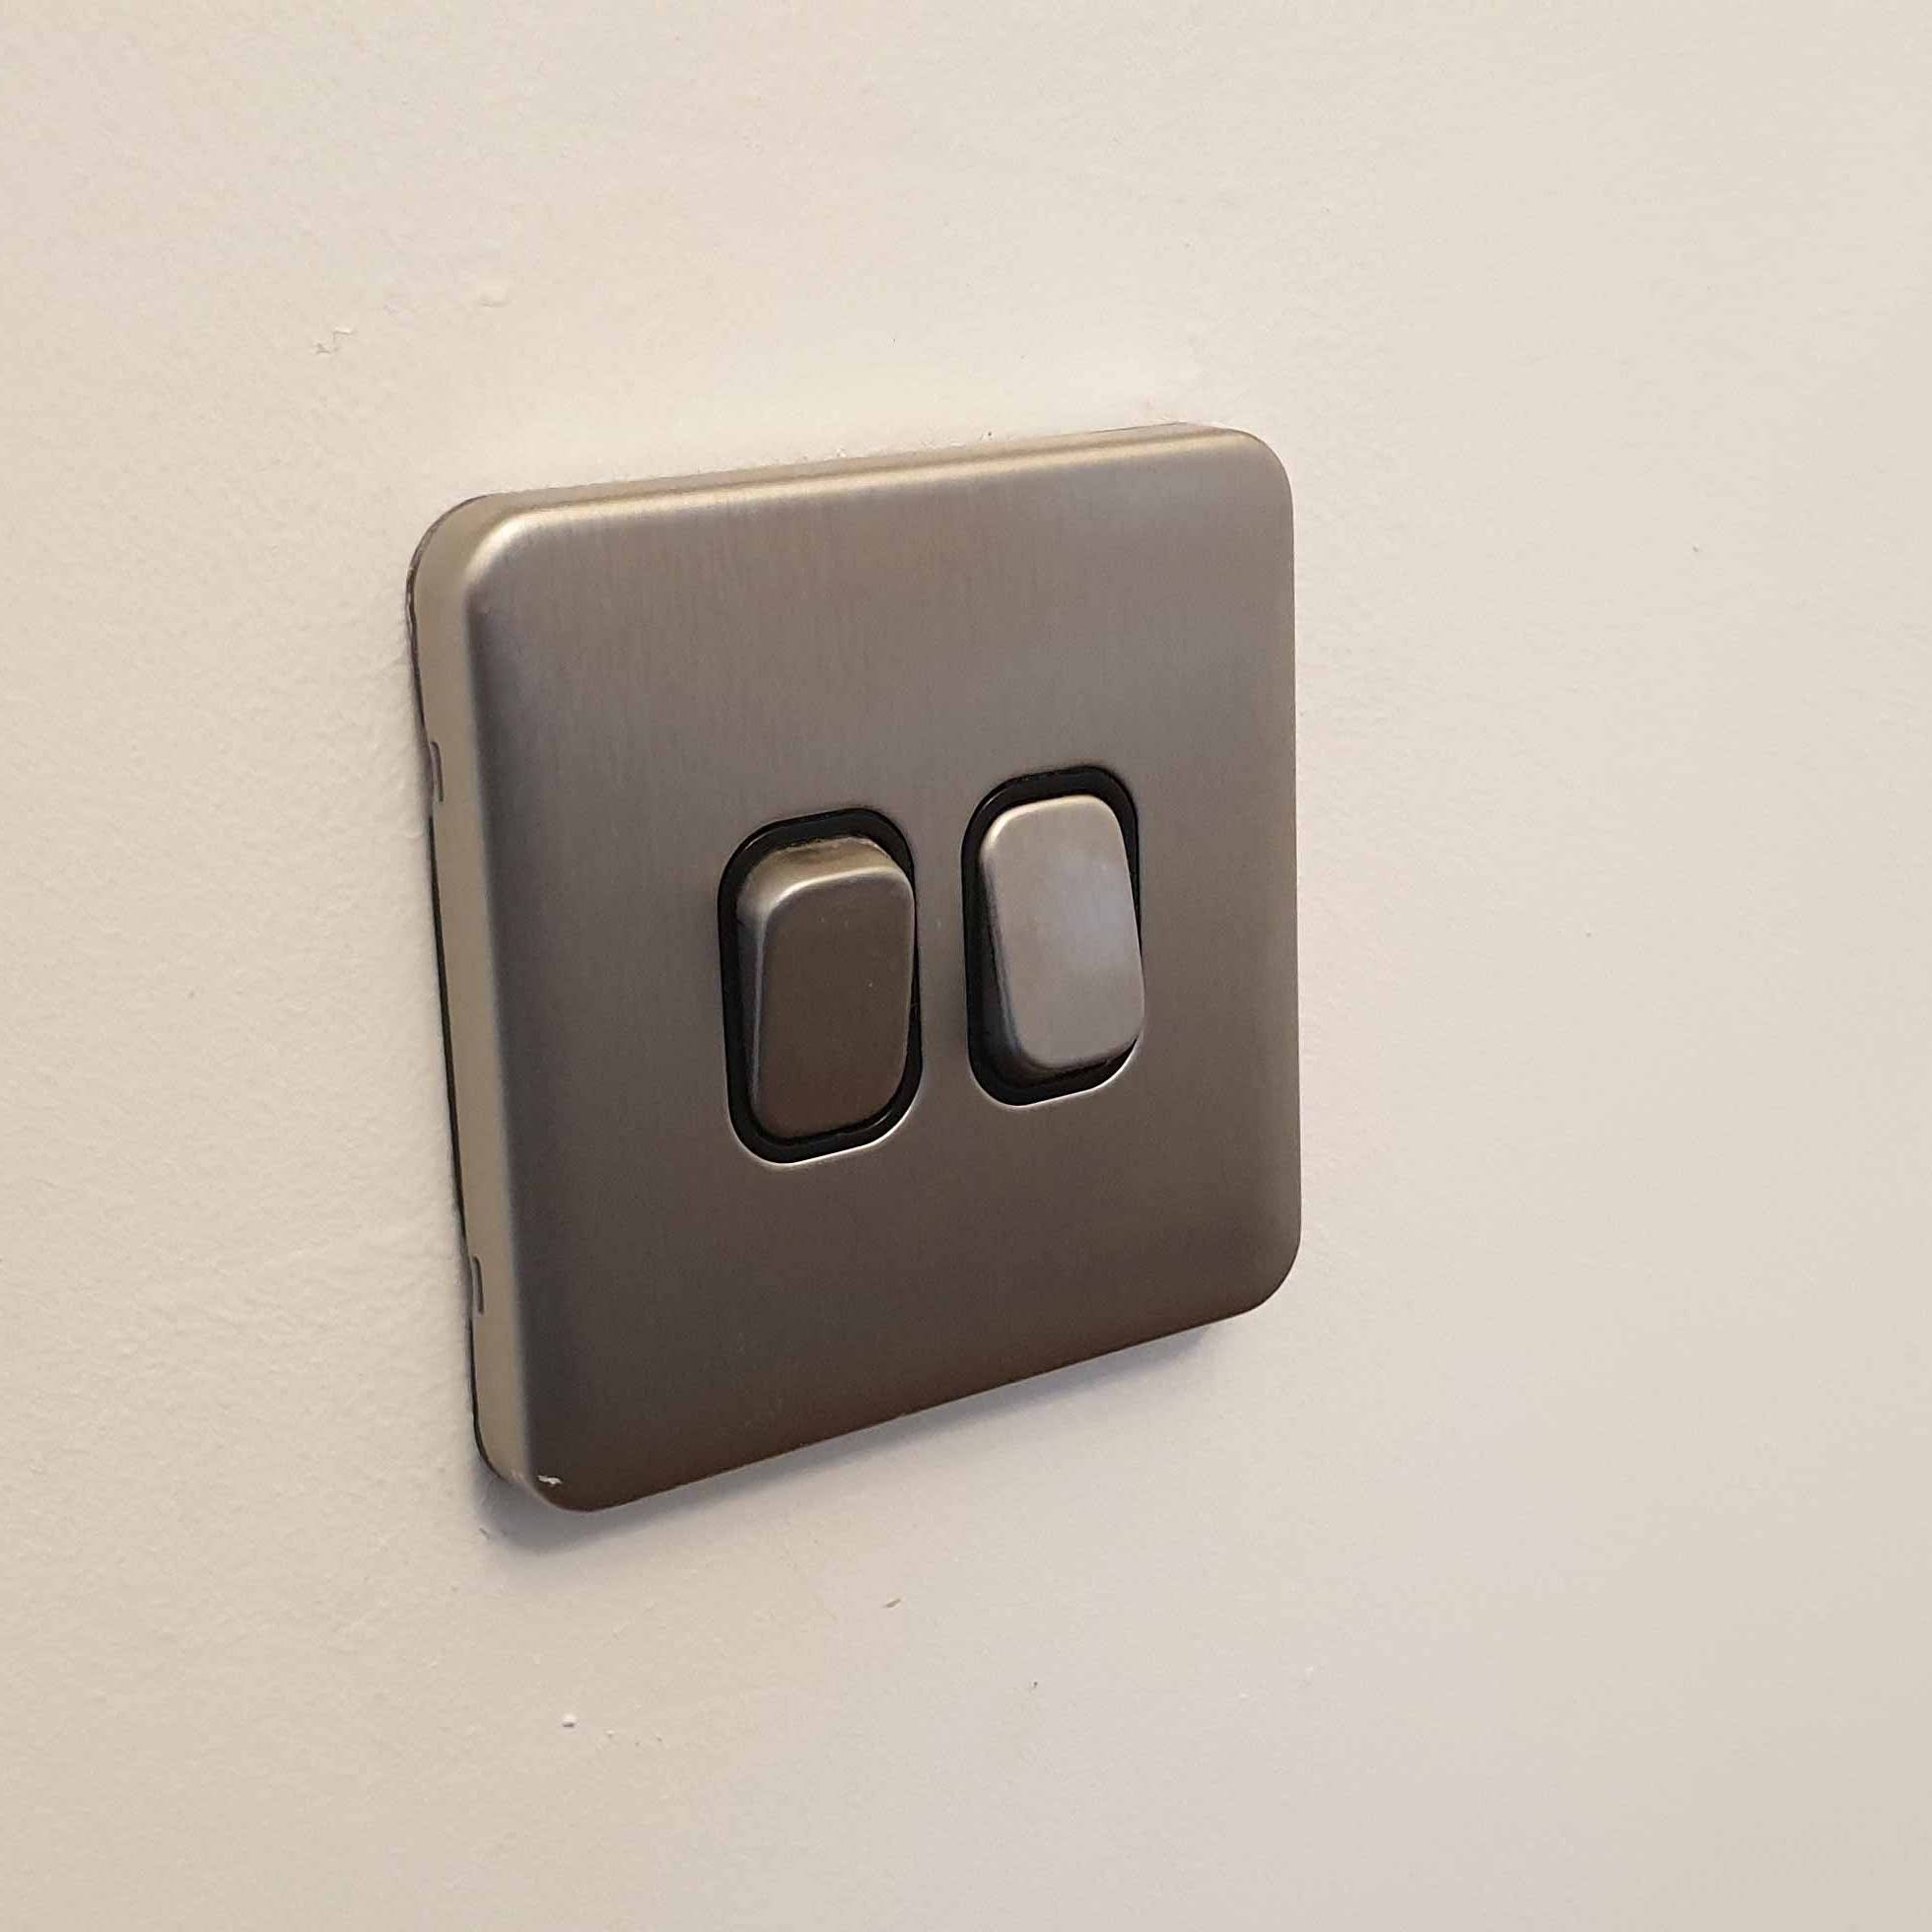 Cleverspark Electrical Installers and Electrians based in Bristol, Bath and the South West of England - An example of interior light/lighing fixture/fitting switch